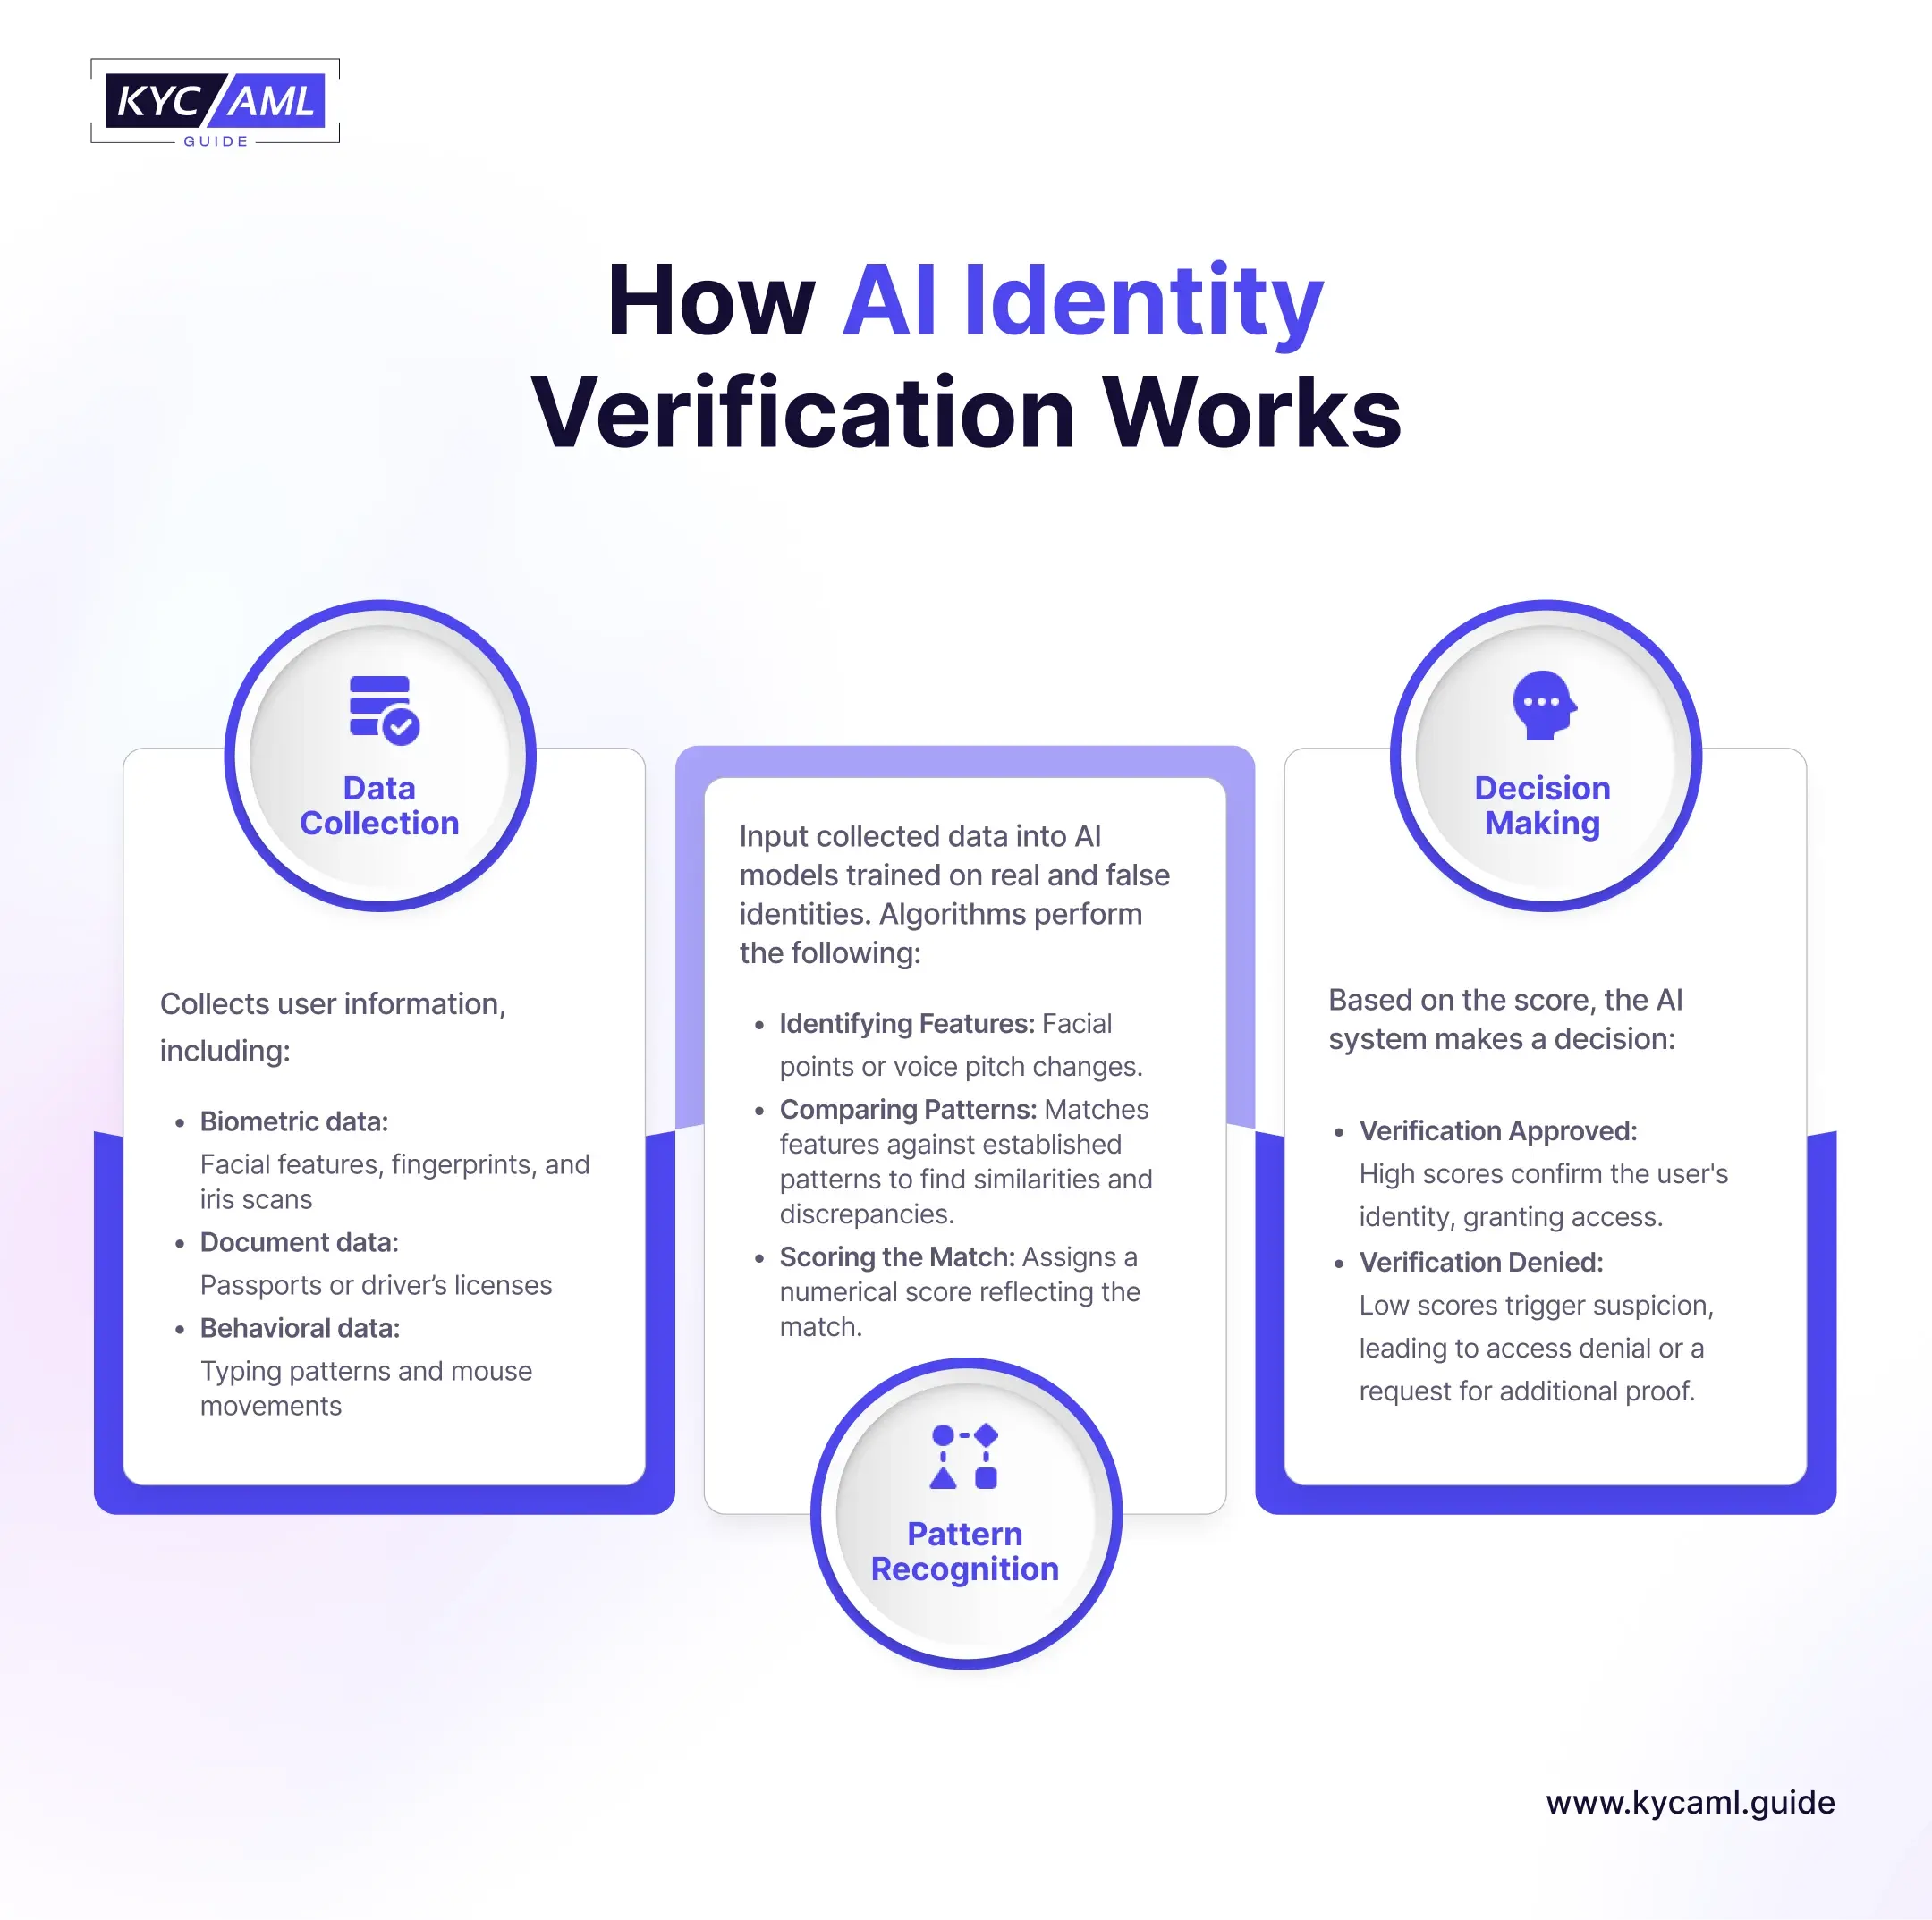 The infographic shows the working of AI Identity Verification in three simple steps: 1)Data Collection 2)Pattern Recognition 3)Decision Making 